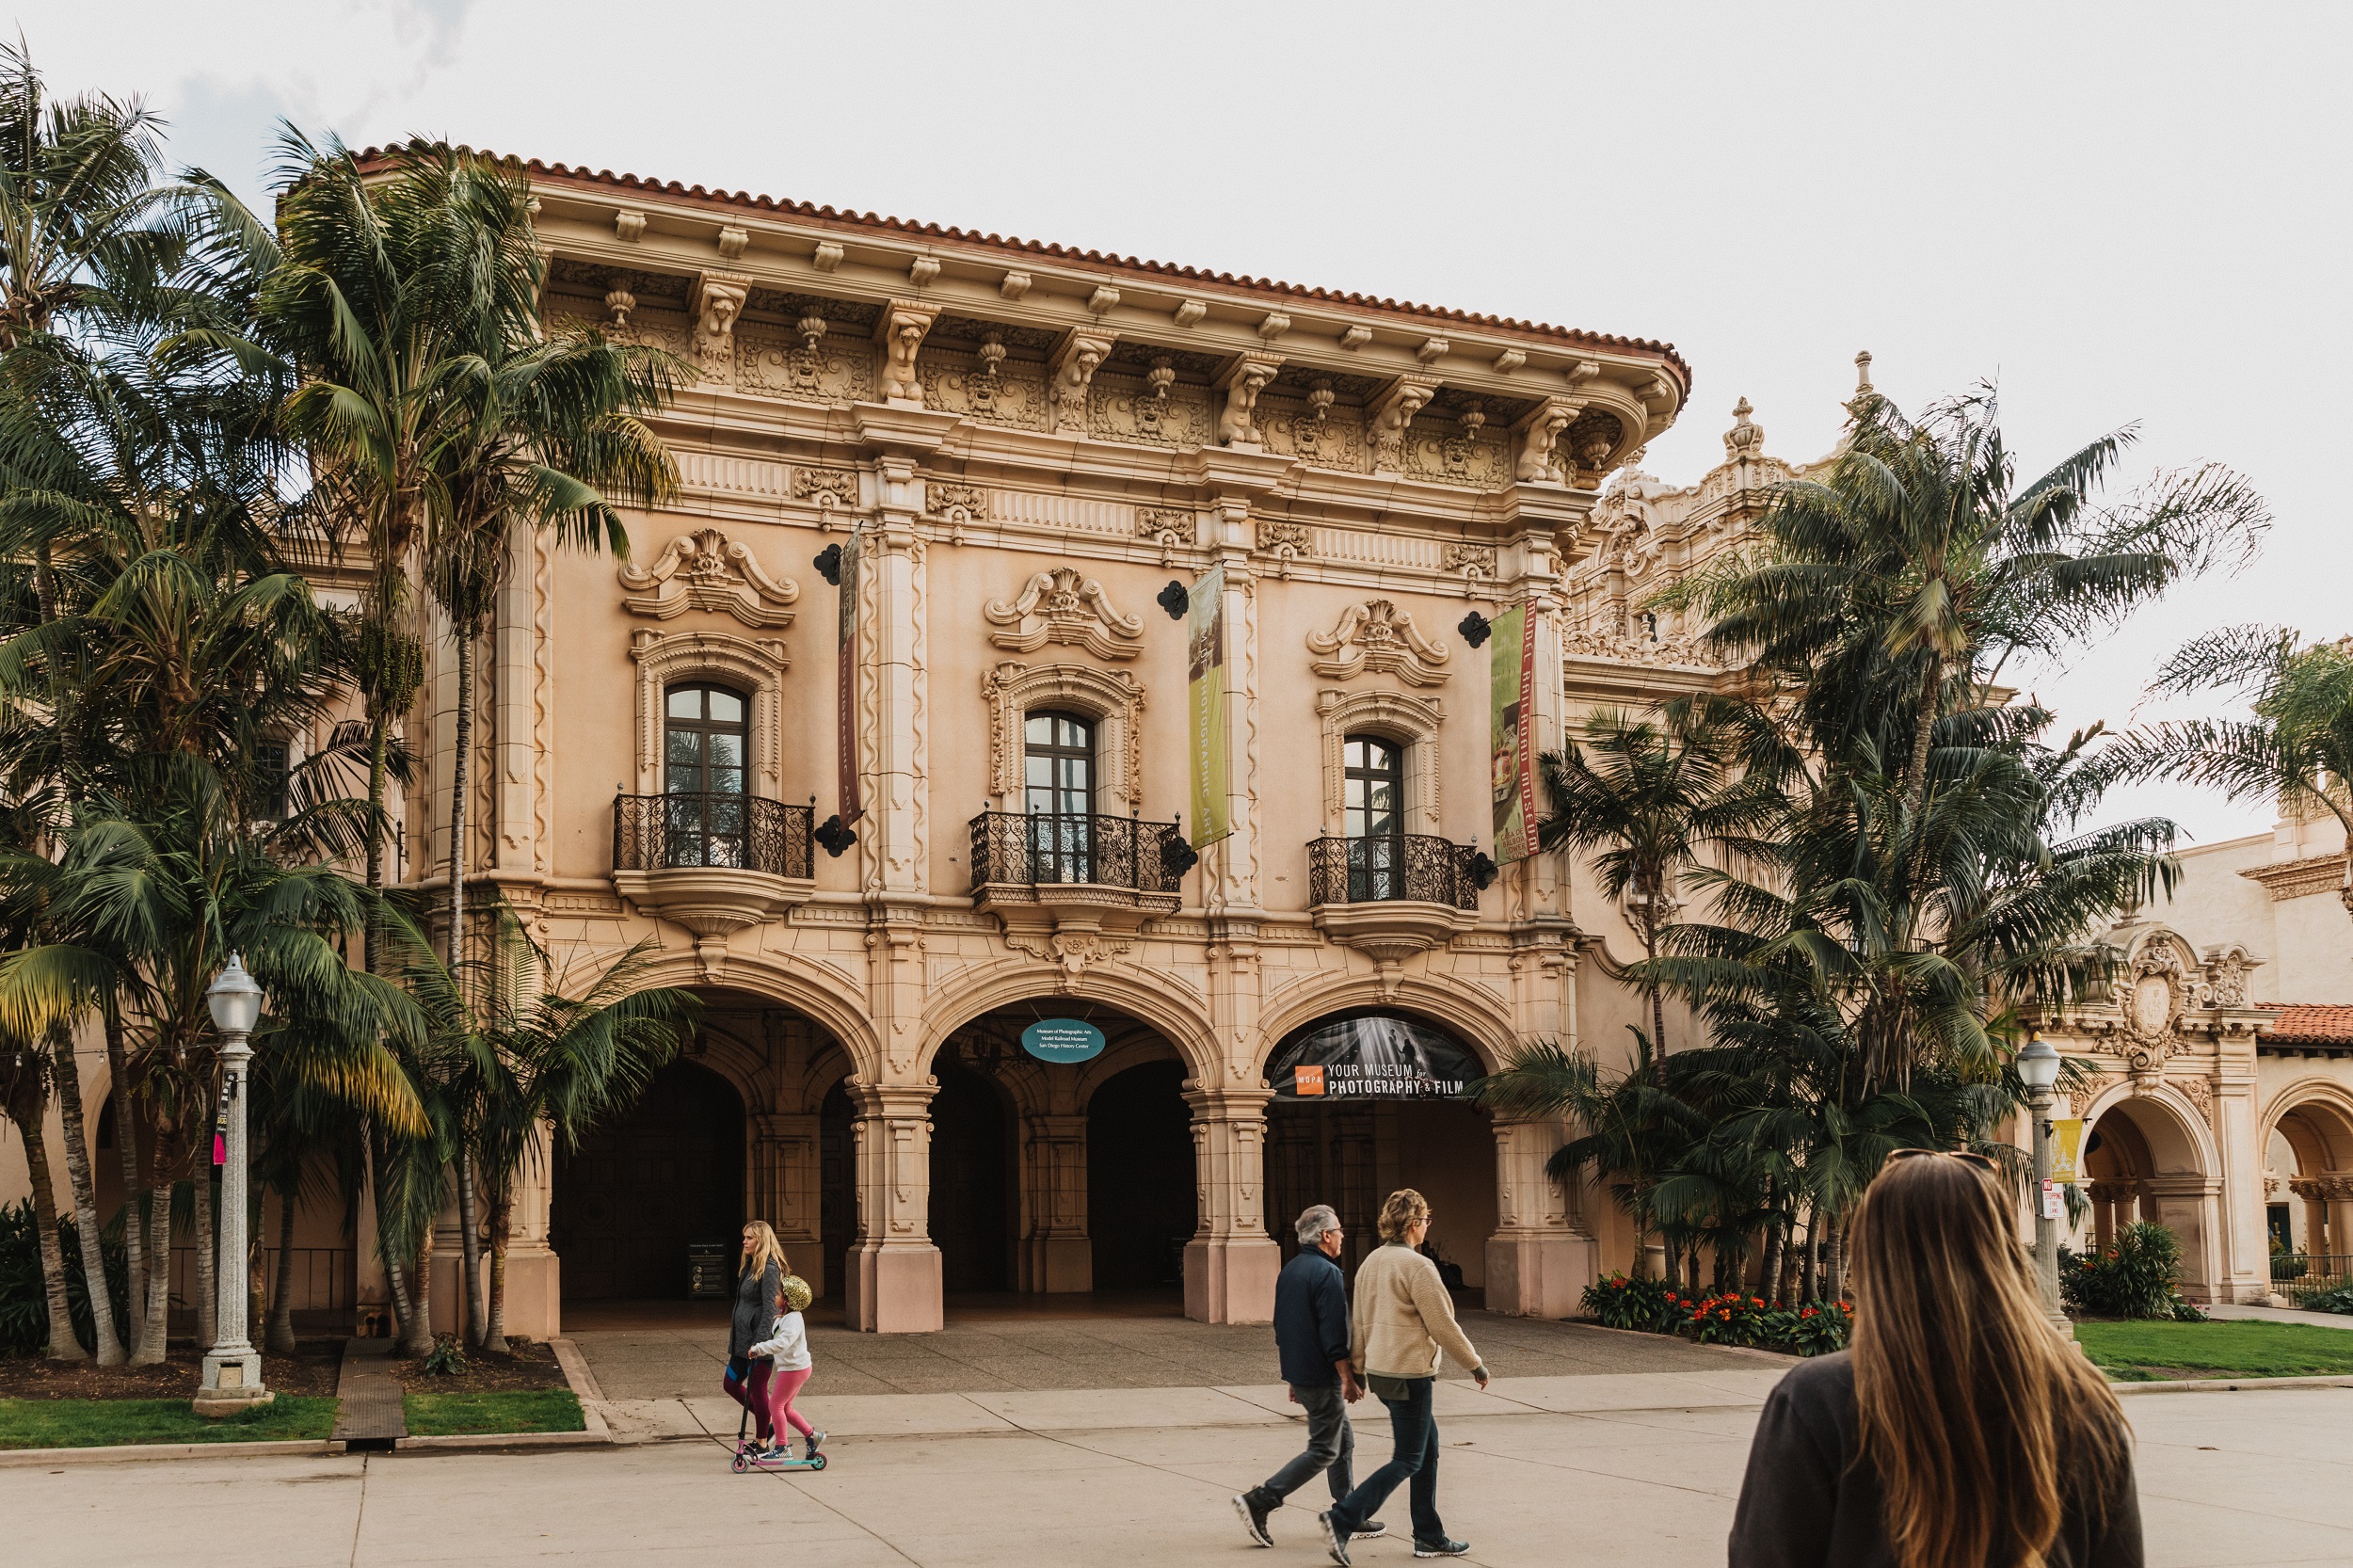 The entrance of the Museum of Photograph Arts at the San Diego Museum of Art in the Casa del Balboa building.